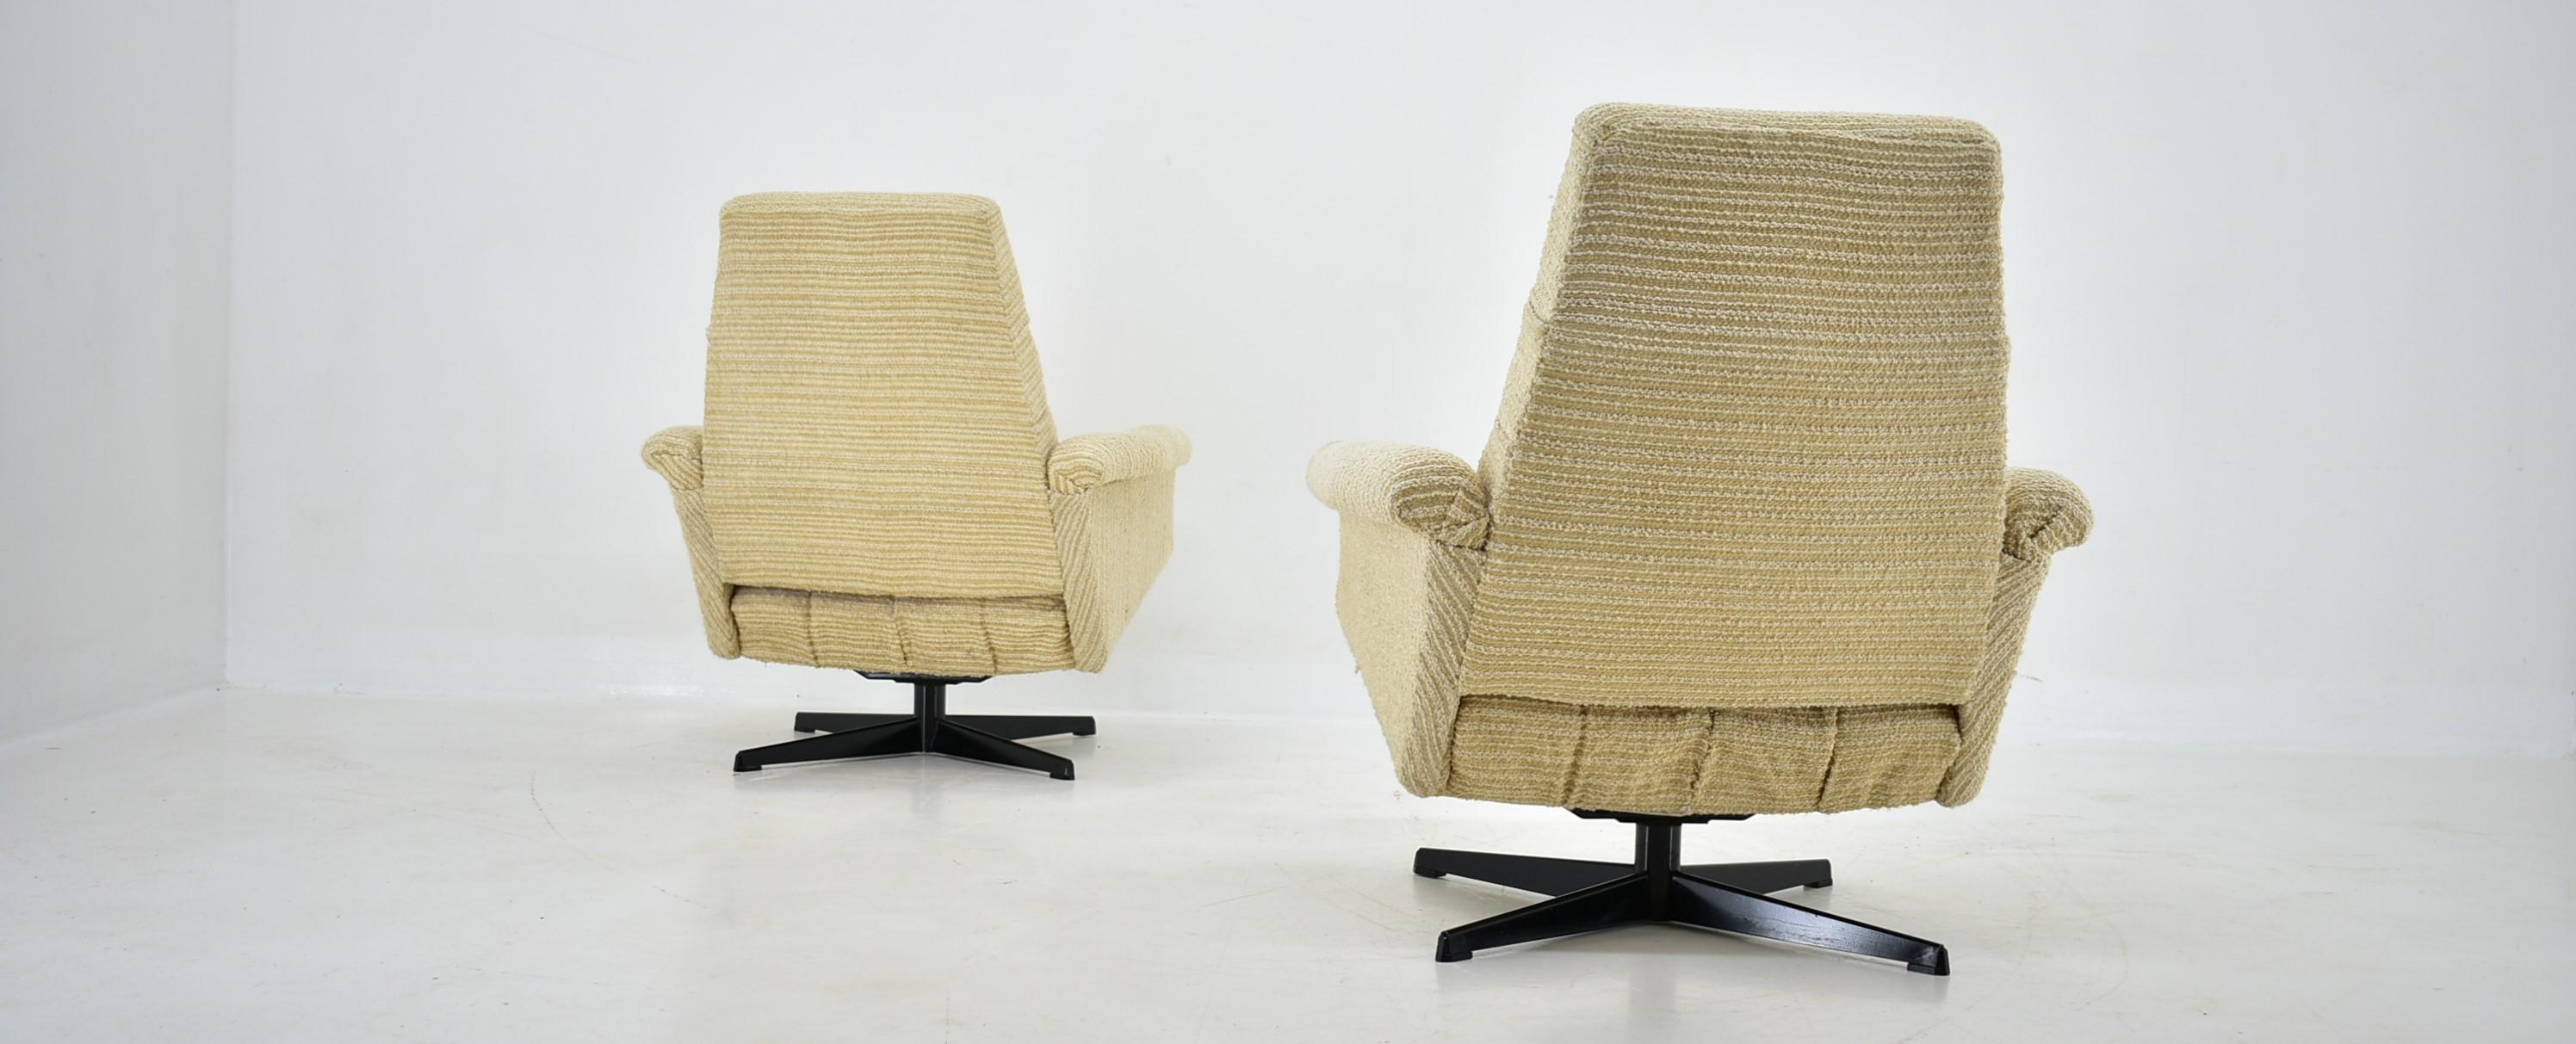 Pair of Armchairs, Tabouret by Morávek a Munzar, 1968s For Sale 10